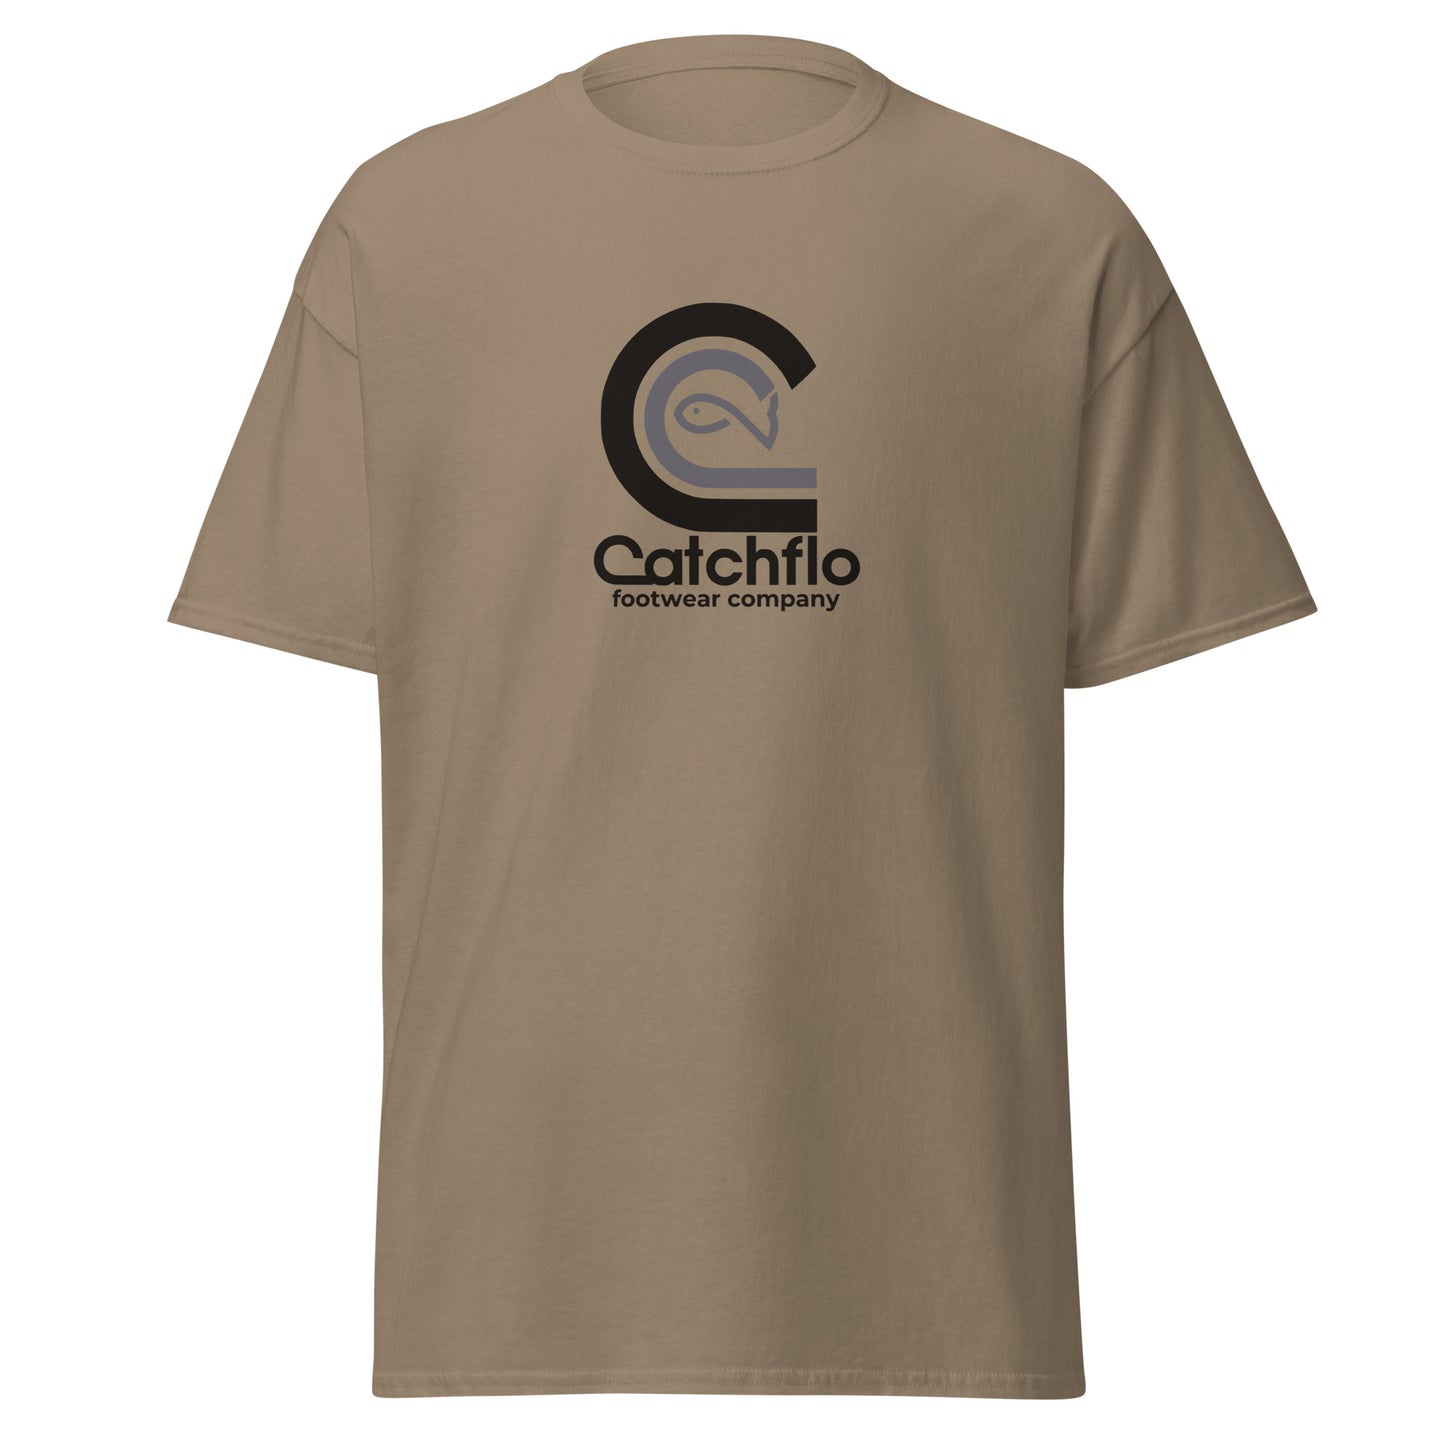 Catchflo Footwear Company Unisex Tee Shirt (20 color choices)